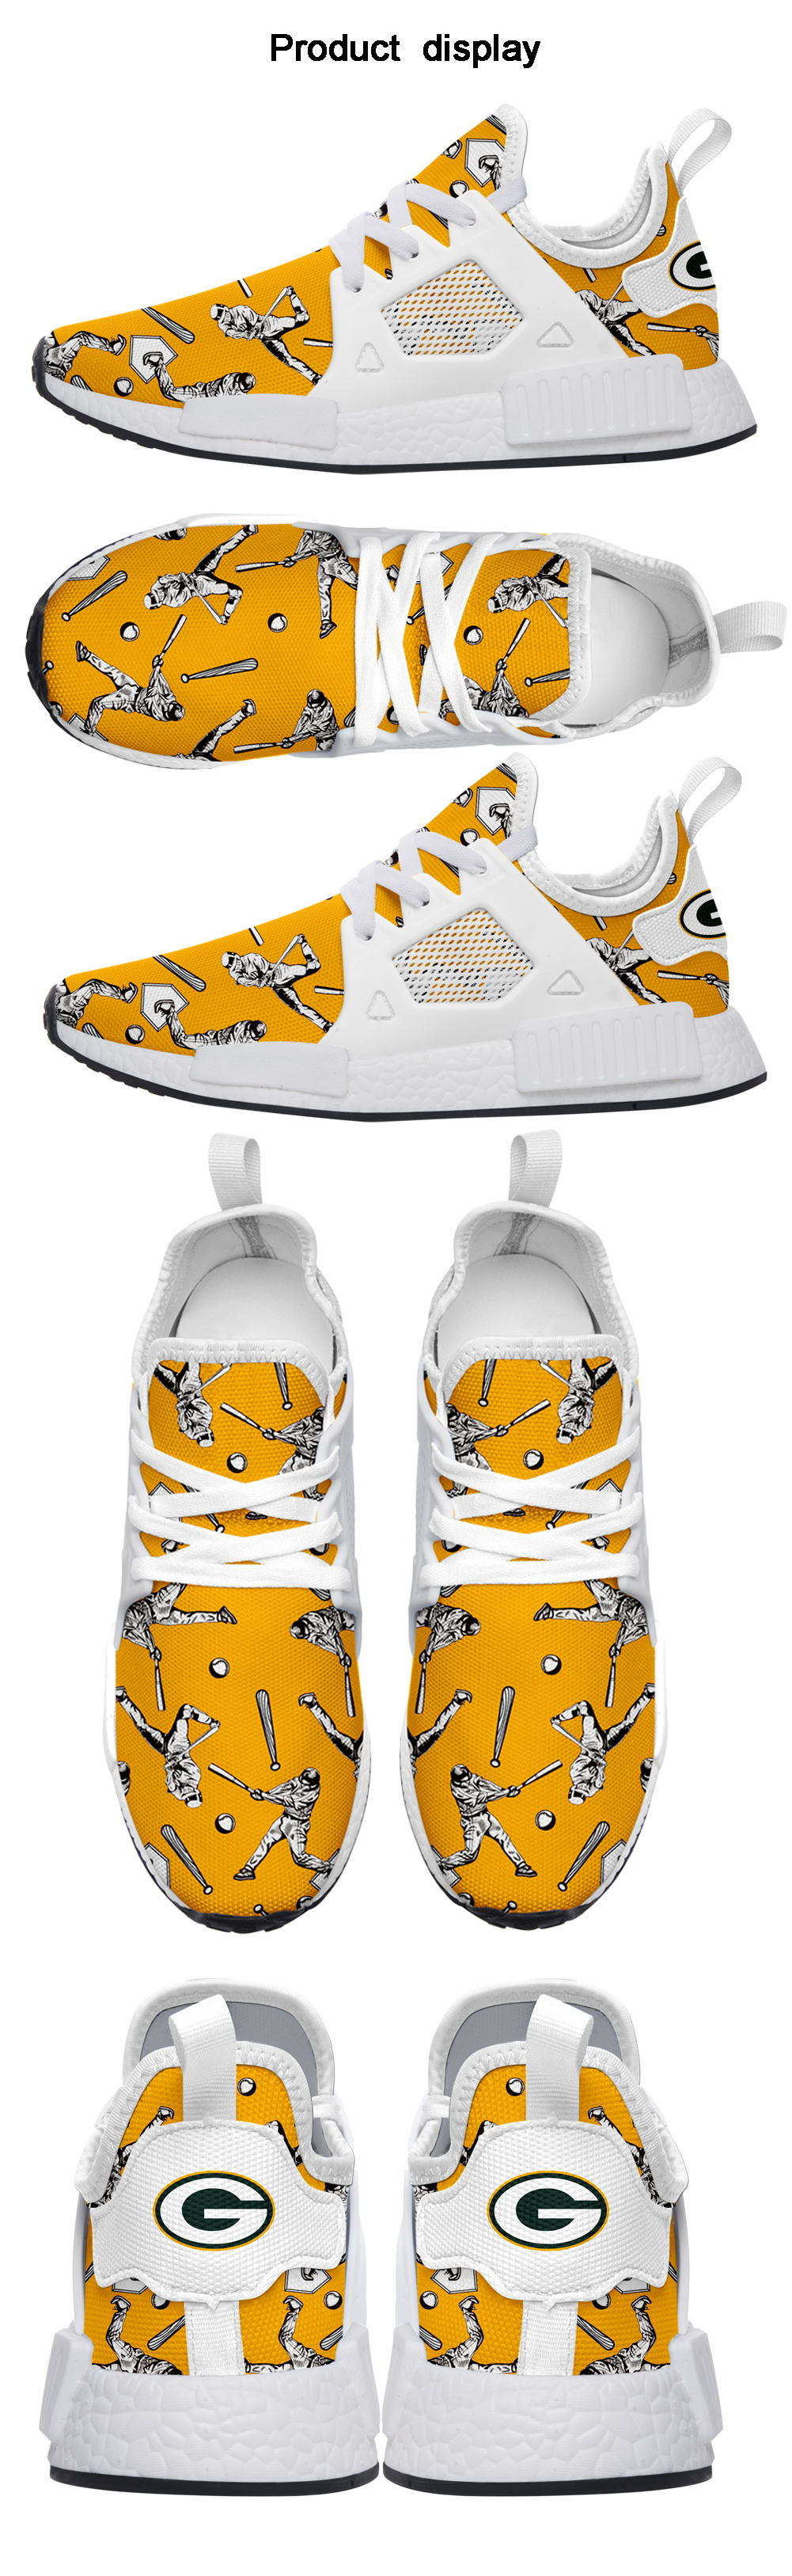 Custom Print on Demand Shoes for Team Baseball Nmd Design Your Own Fashion Sneakers Running Shoes